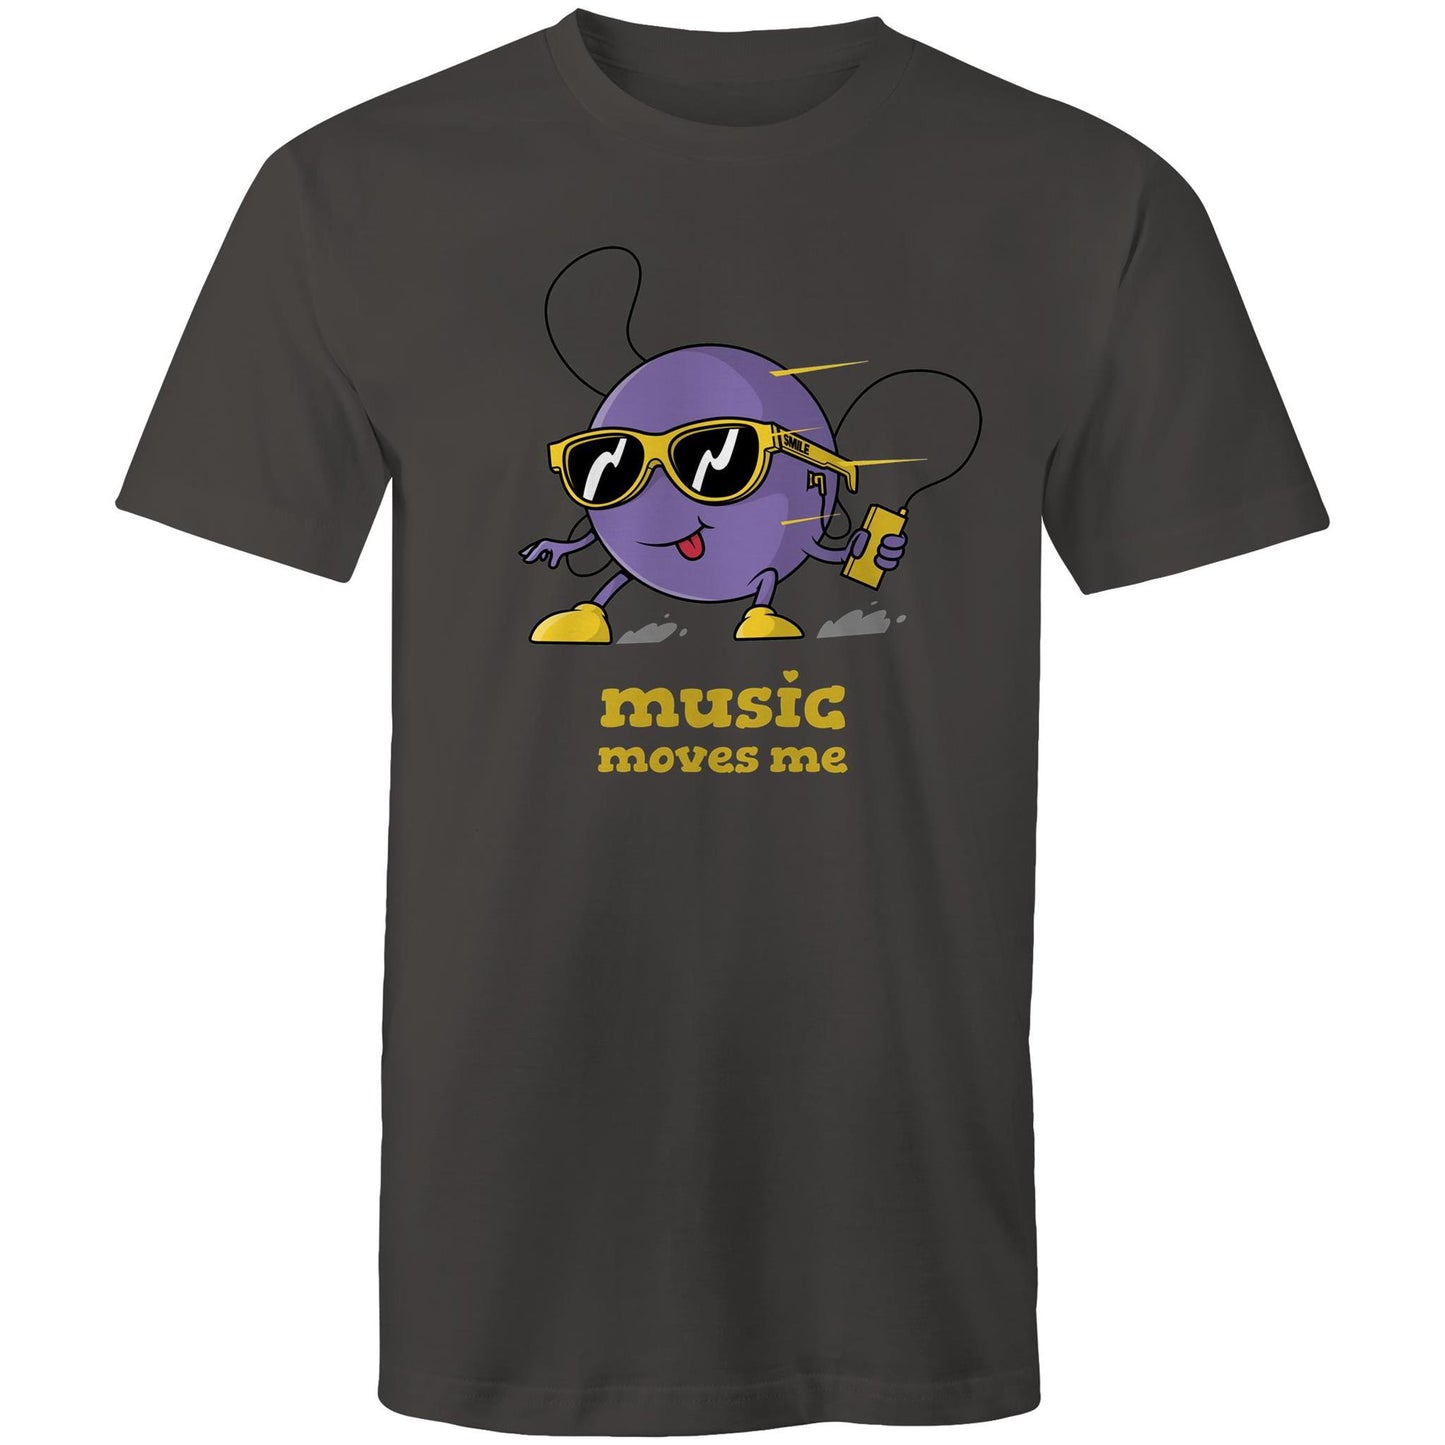 Music Moves Me, Earbuds - Mens T-Shirt Charcoal Mens T-shirt Music